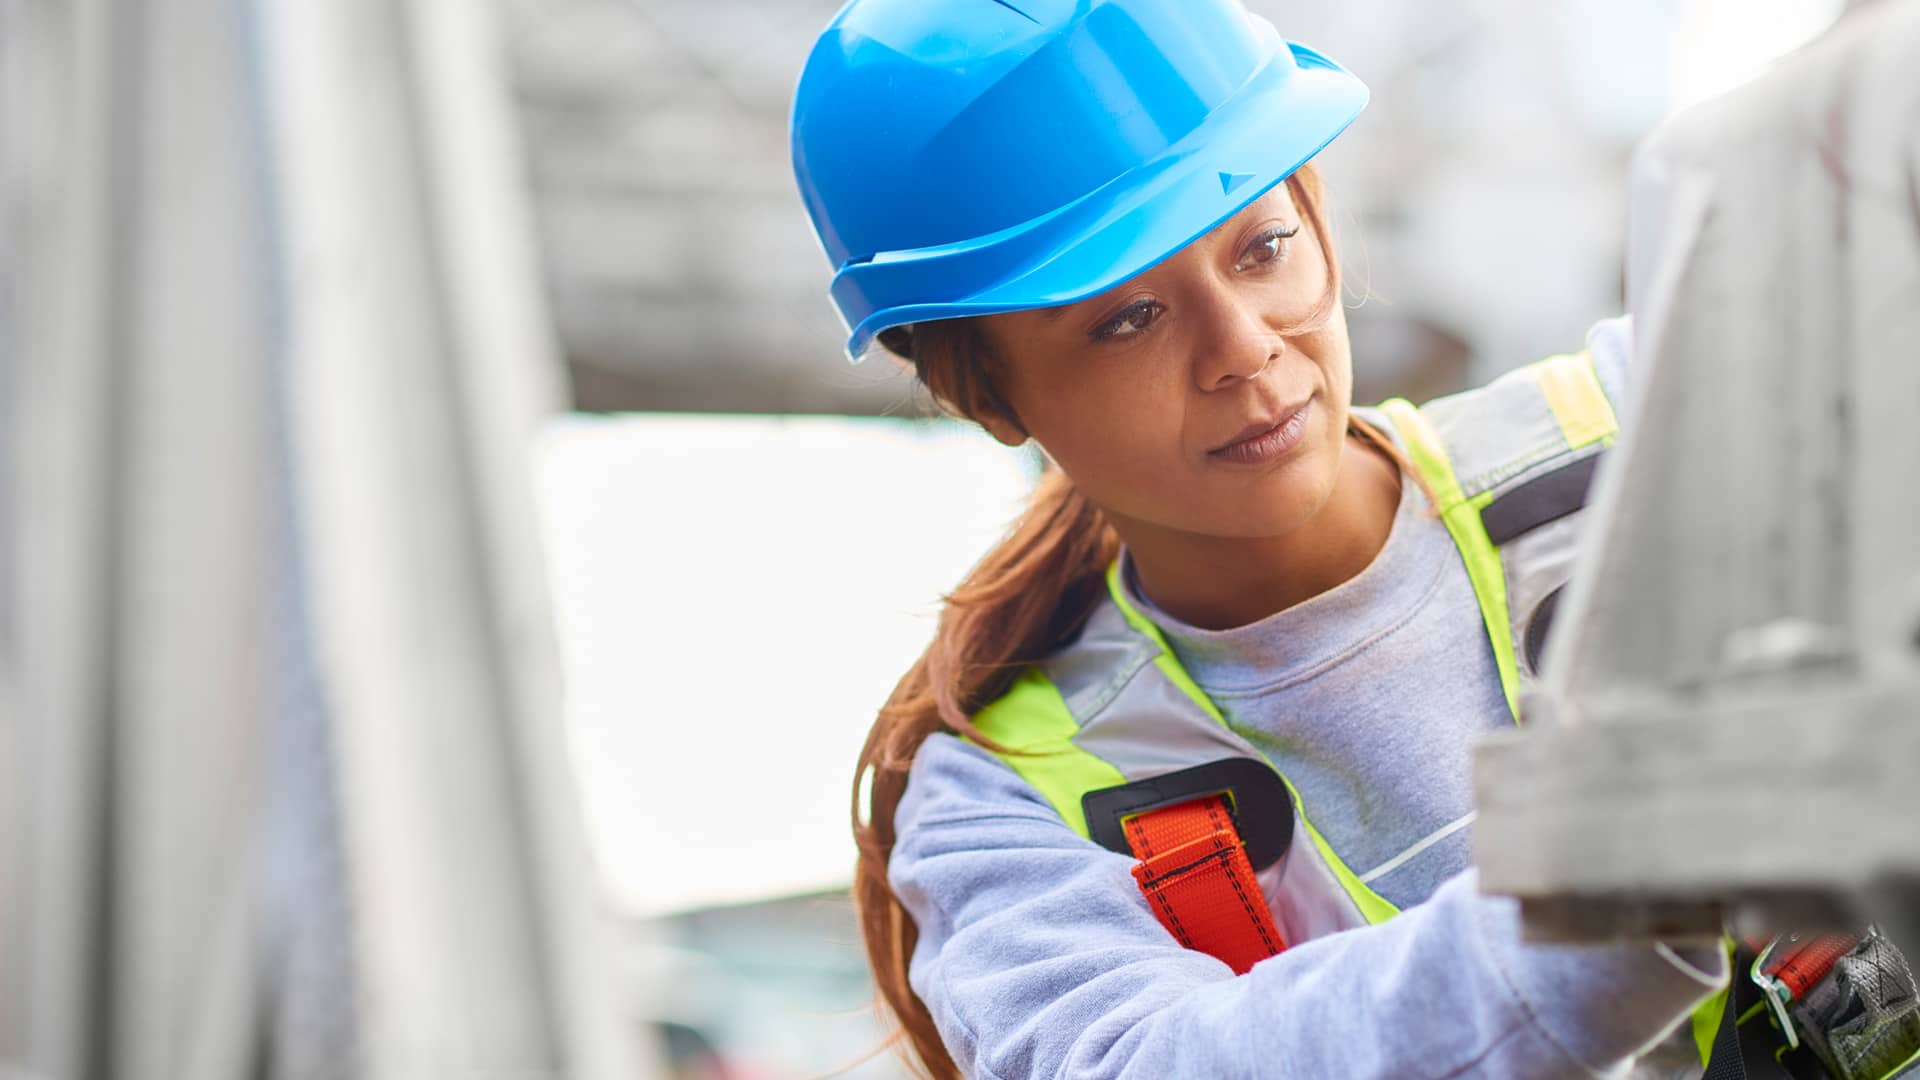 How to Become a Civil Engineer - Career Girls - Explore Careers